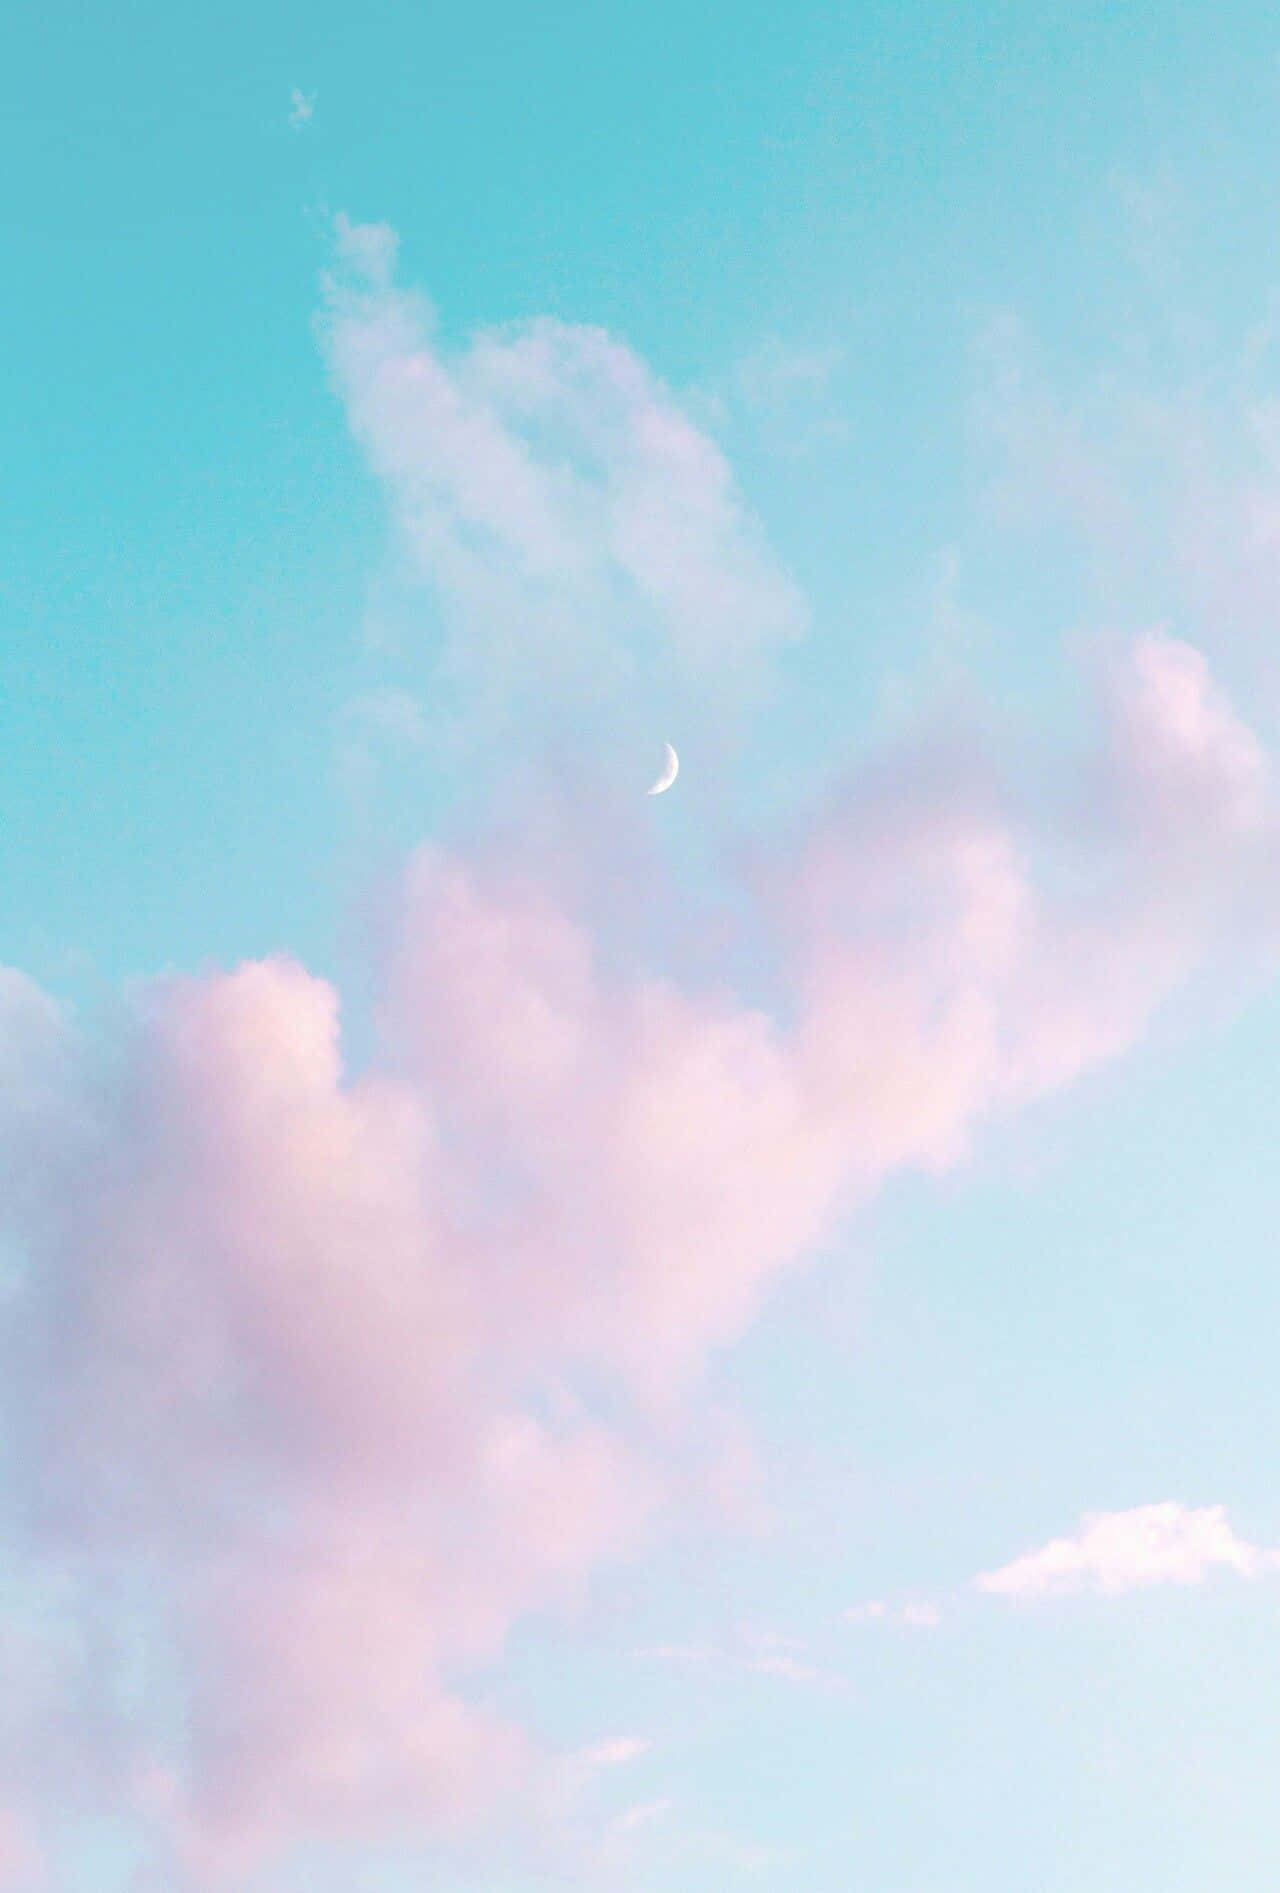 Pastel Blue Aesthetic Pink Clouds Wallpaper